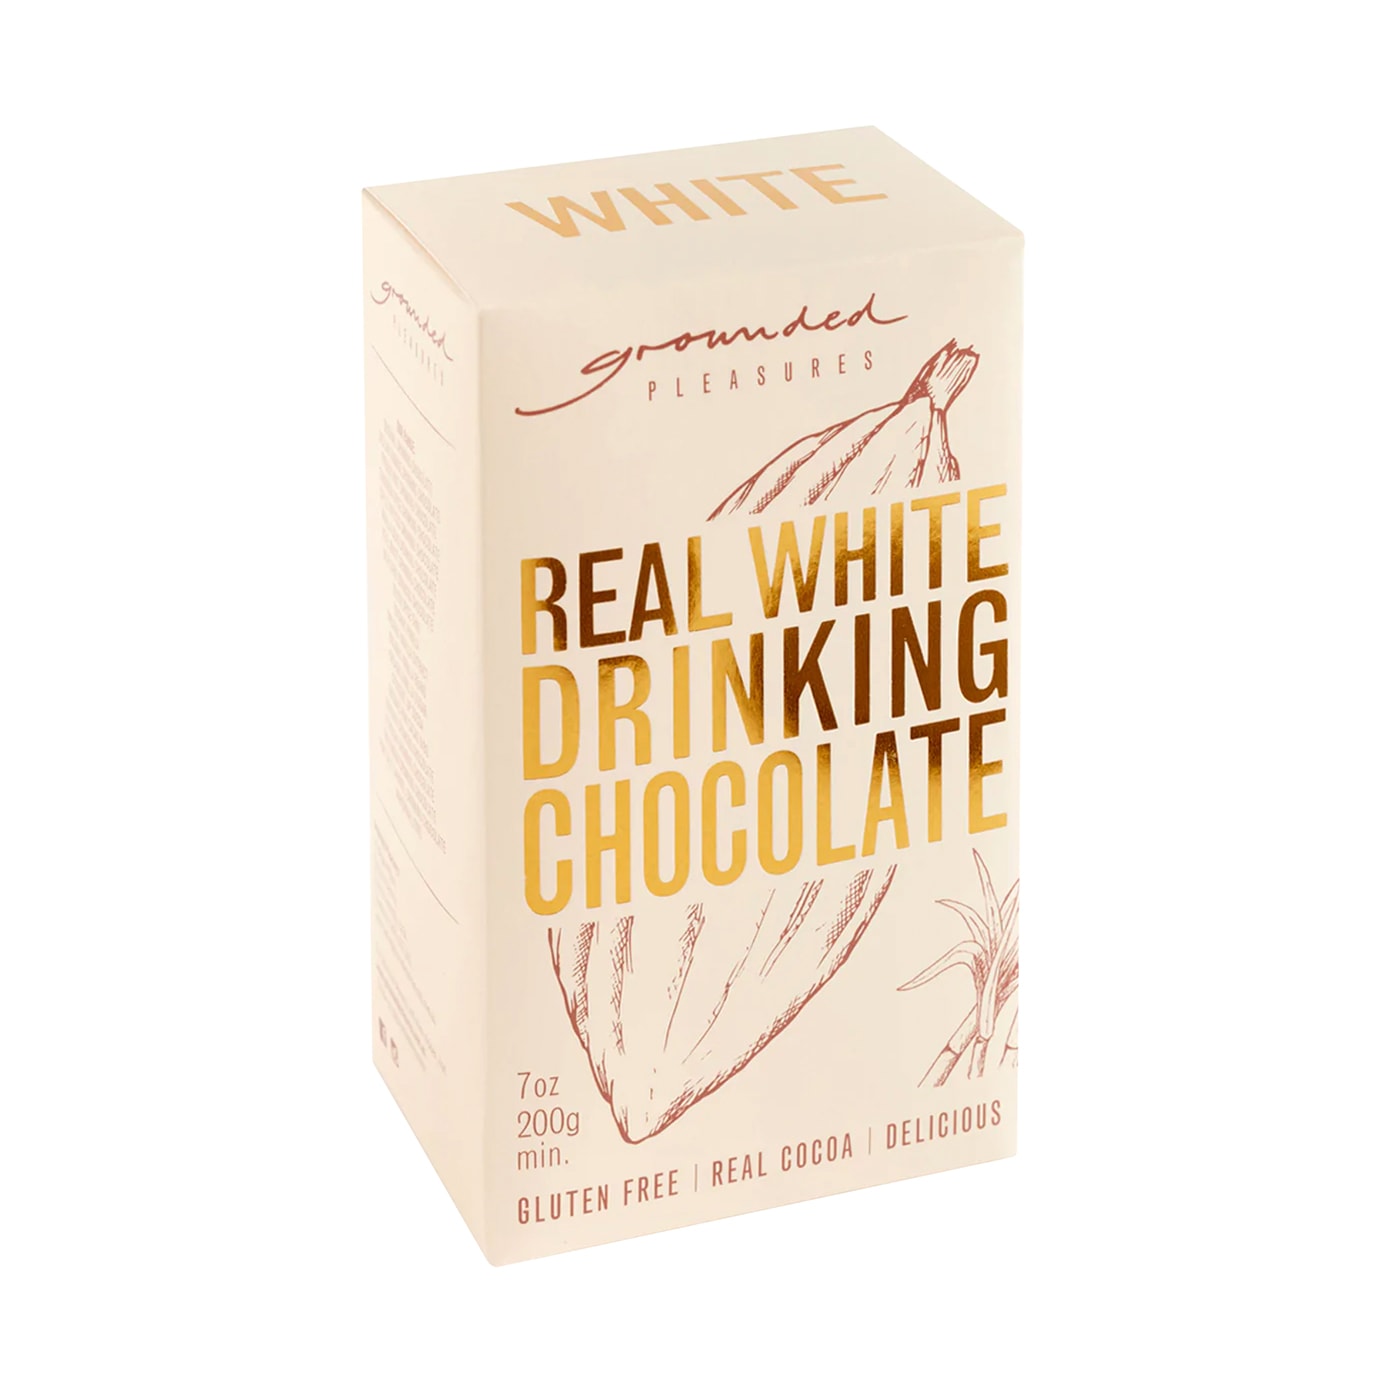 Grounded Pleasures Real White Drinking Chocolate